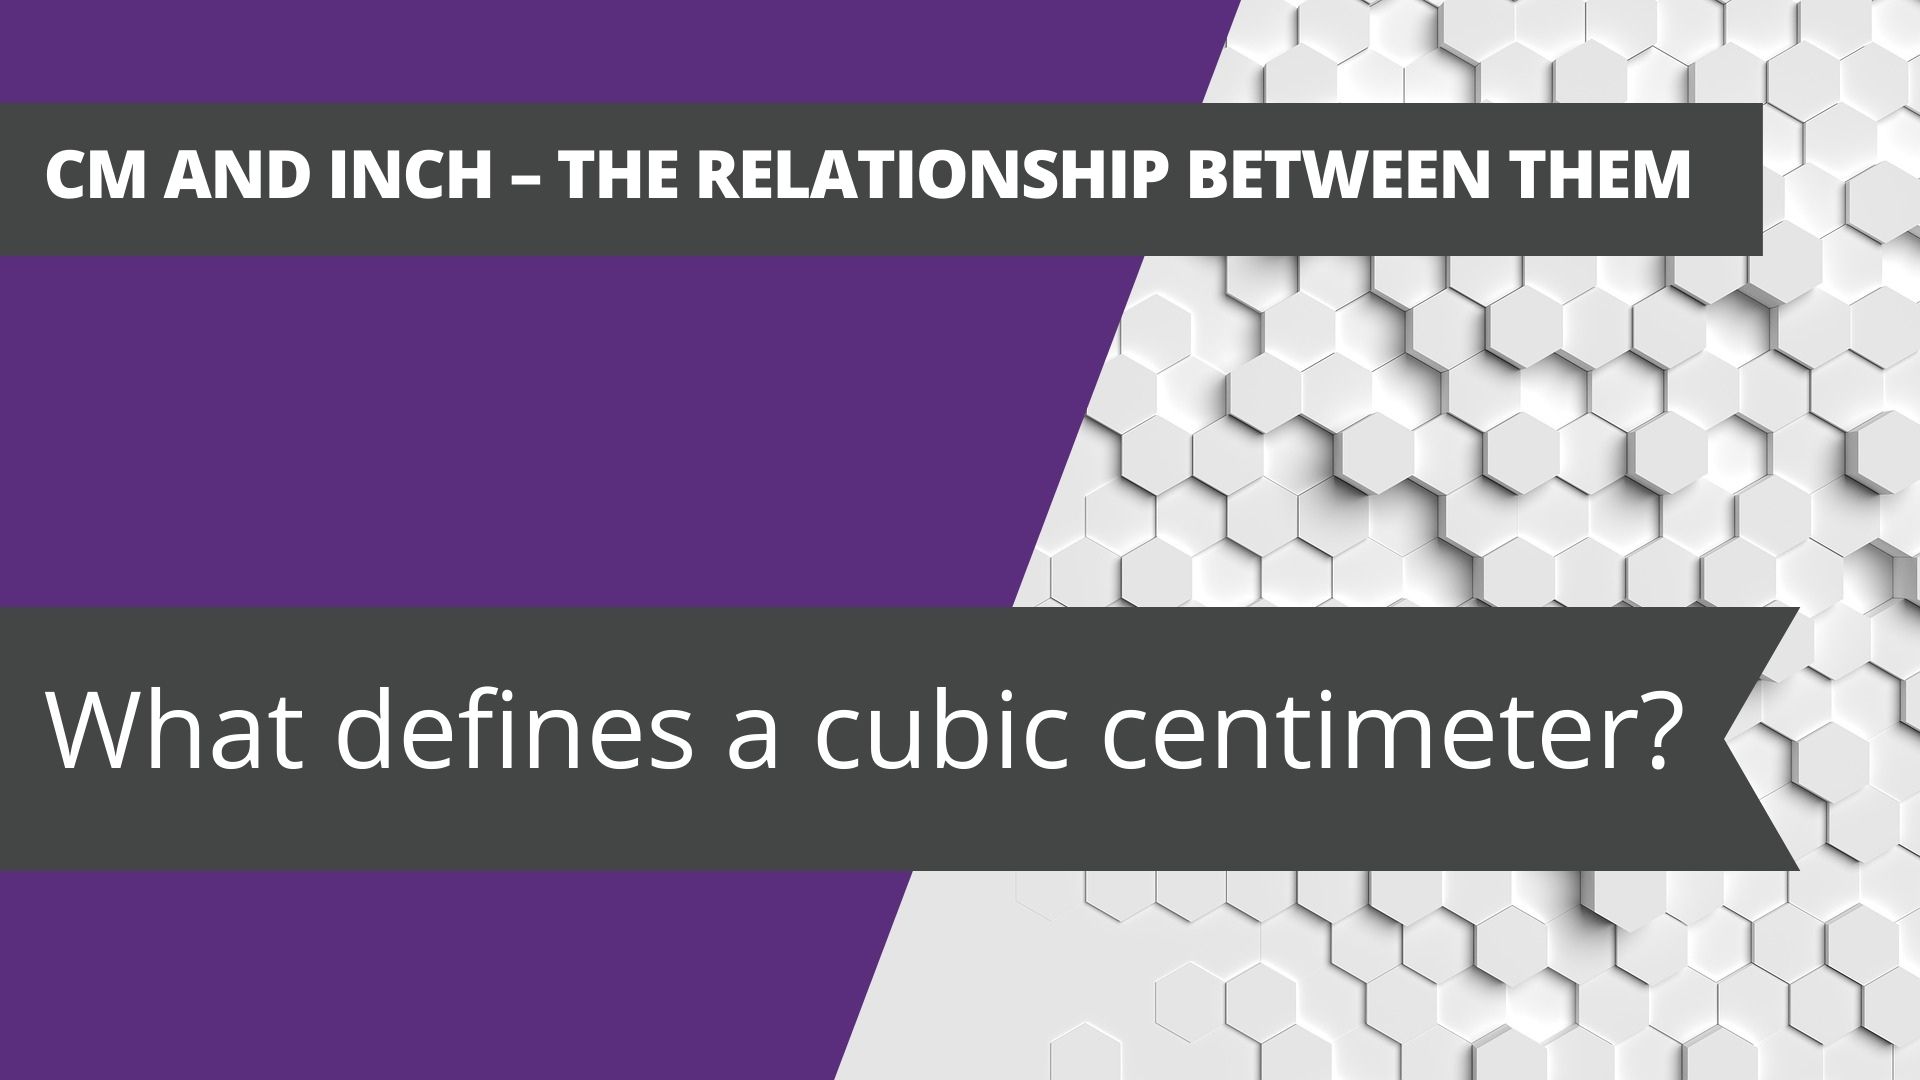 Cm and inch – the relationship between them